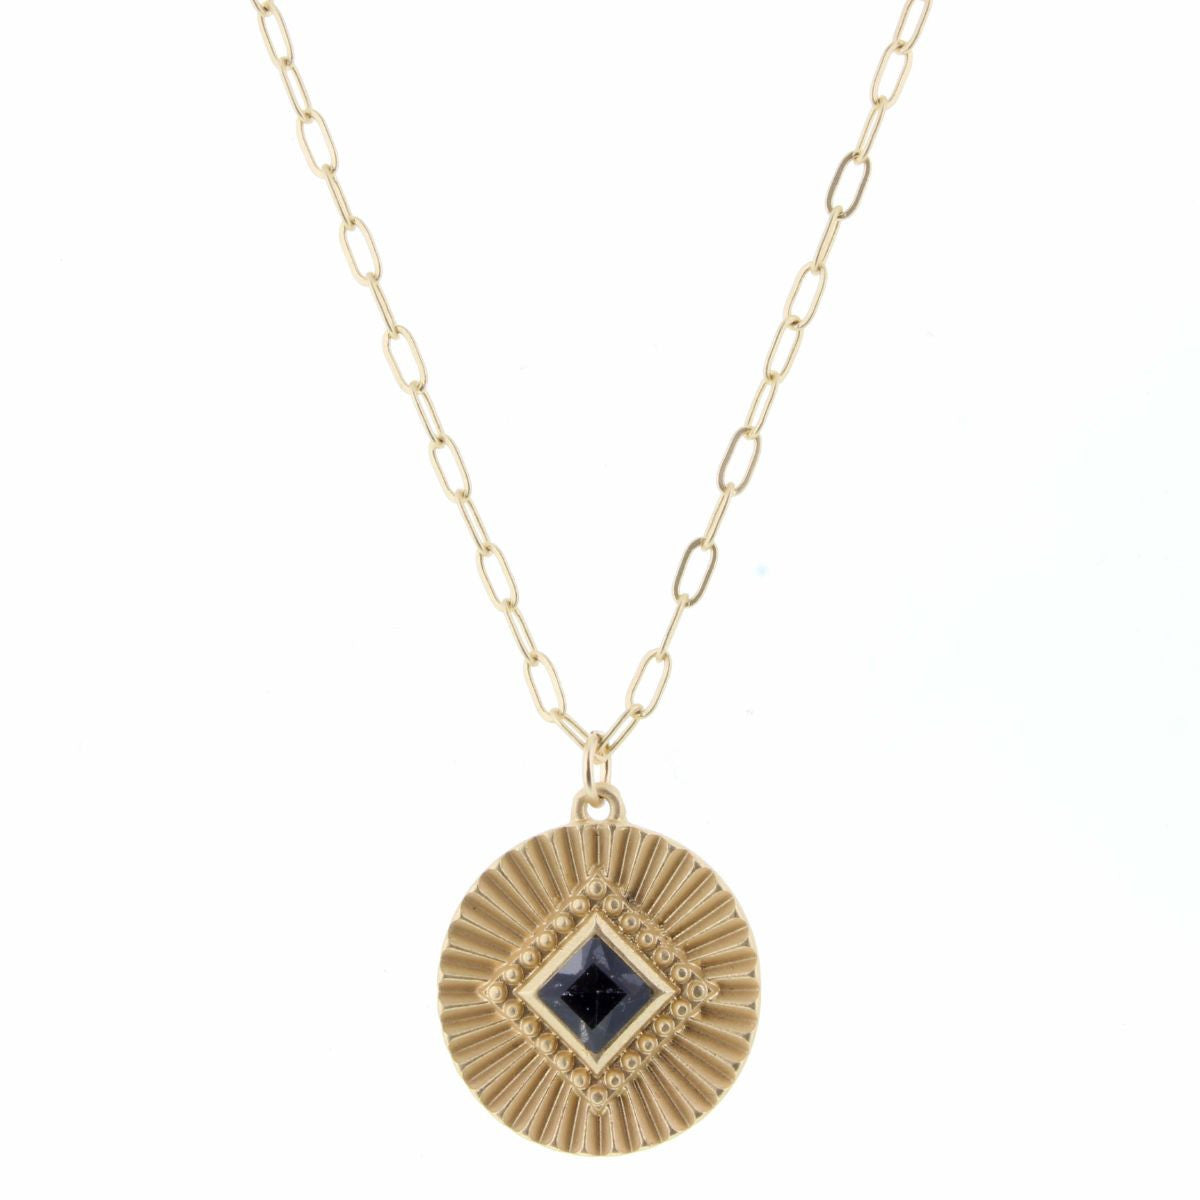 Eliana Necklace - 18-24" Gold Chain with Textured Disk & Black Diamond Center Charm-Necklace-Lemons and Limes Boutique